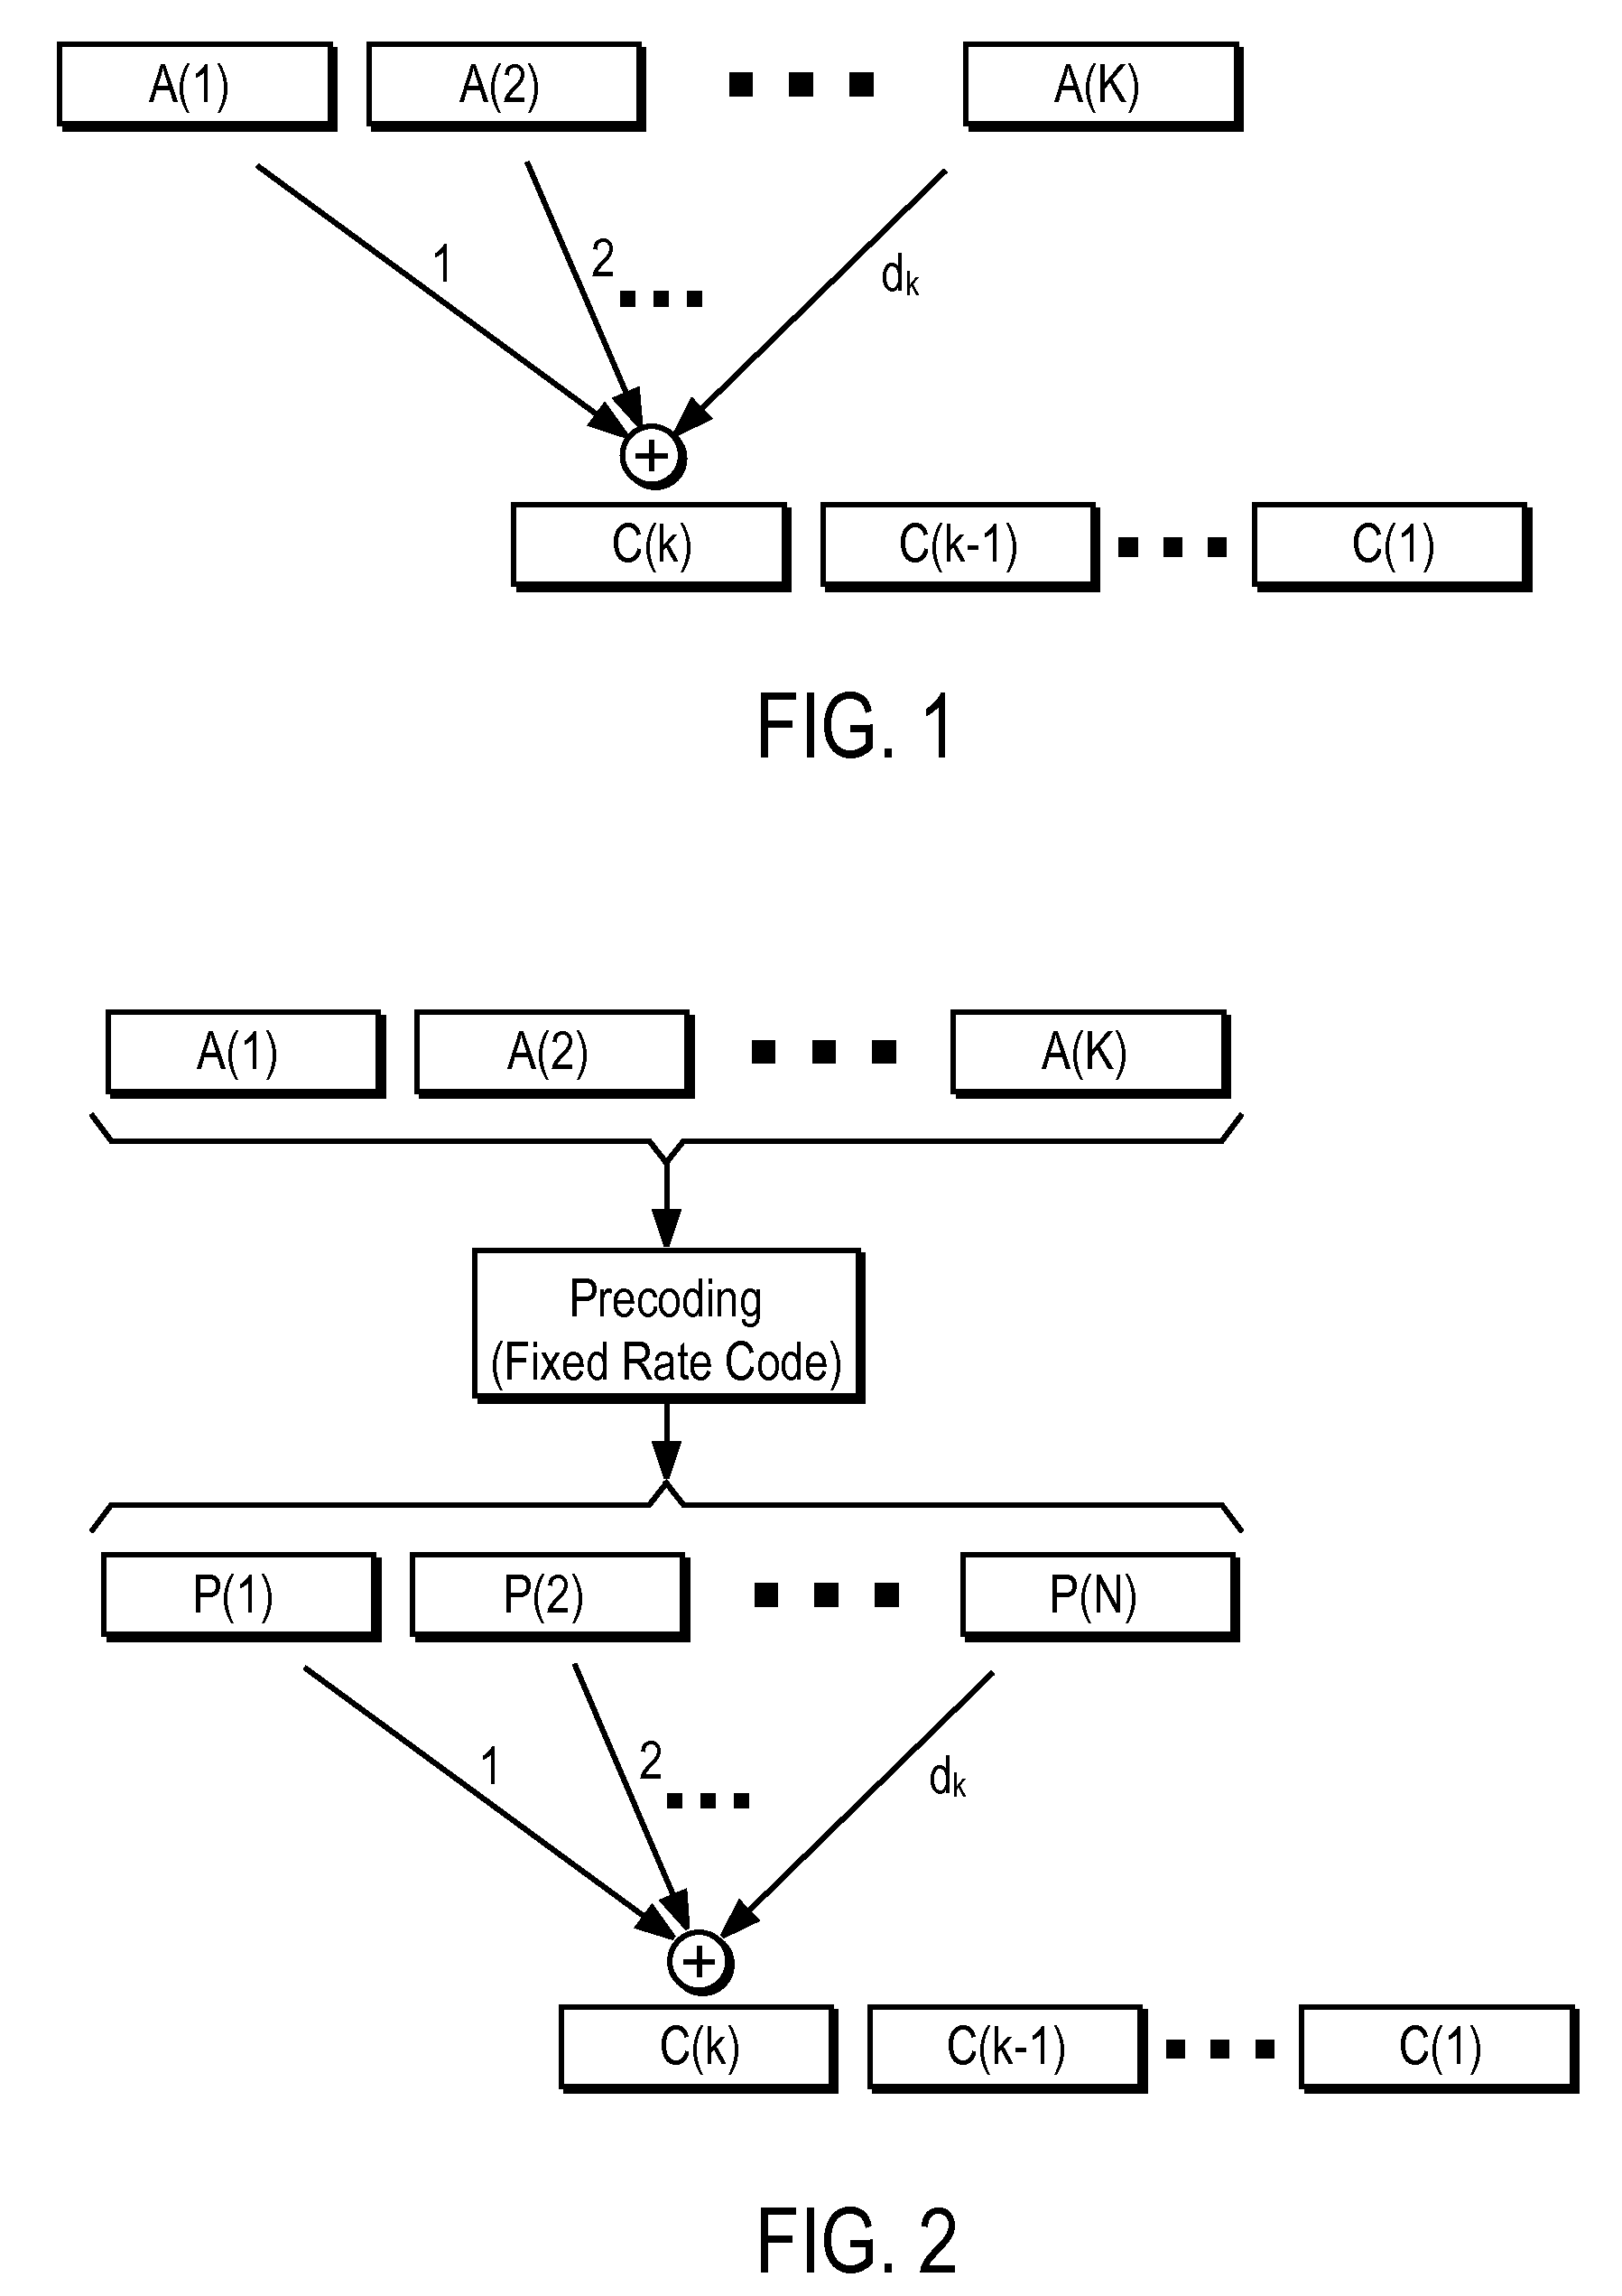 Low complexity encryption method for content that is coded by a rateless code